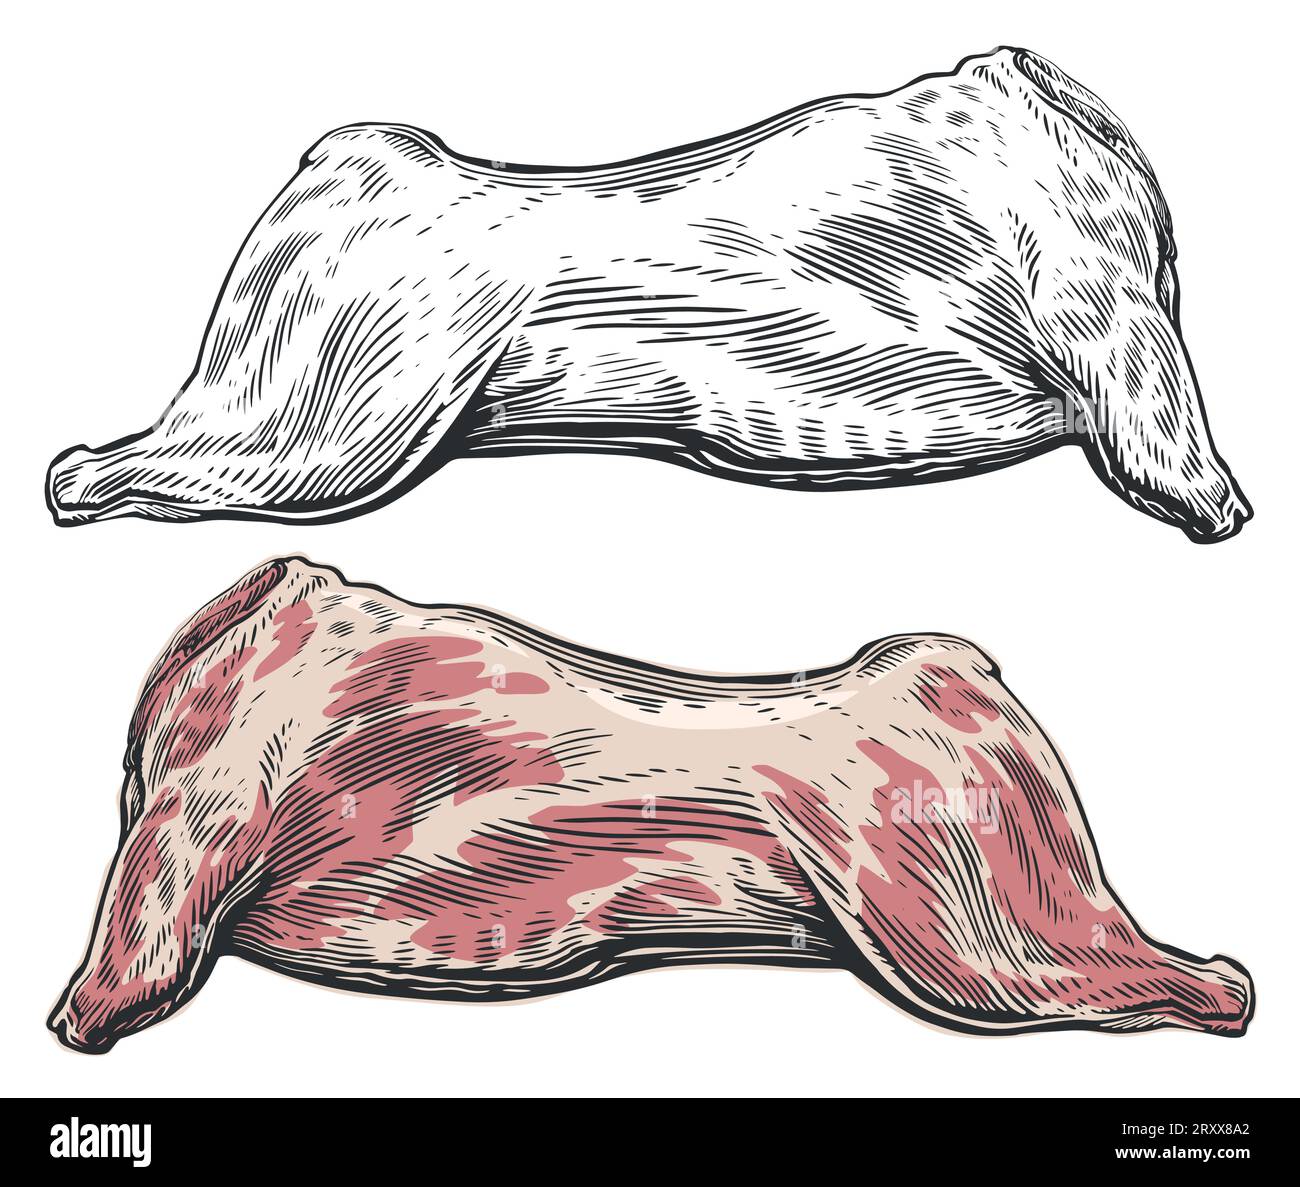 Whole raw meat carcass. Vector illustration engraving style Stock Vector